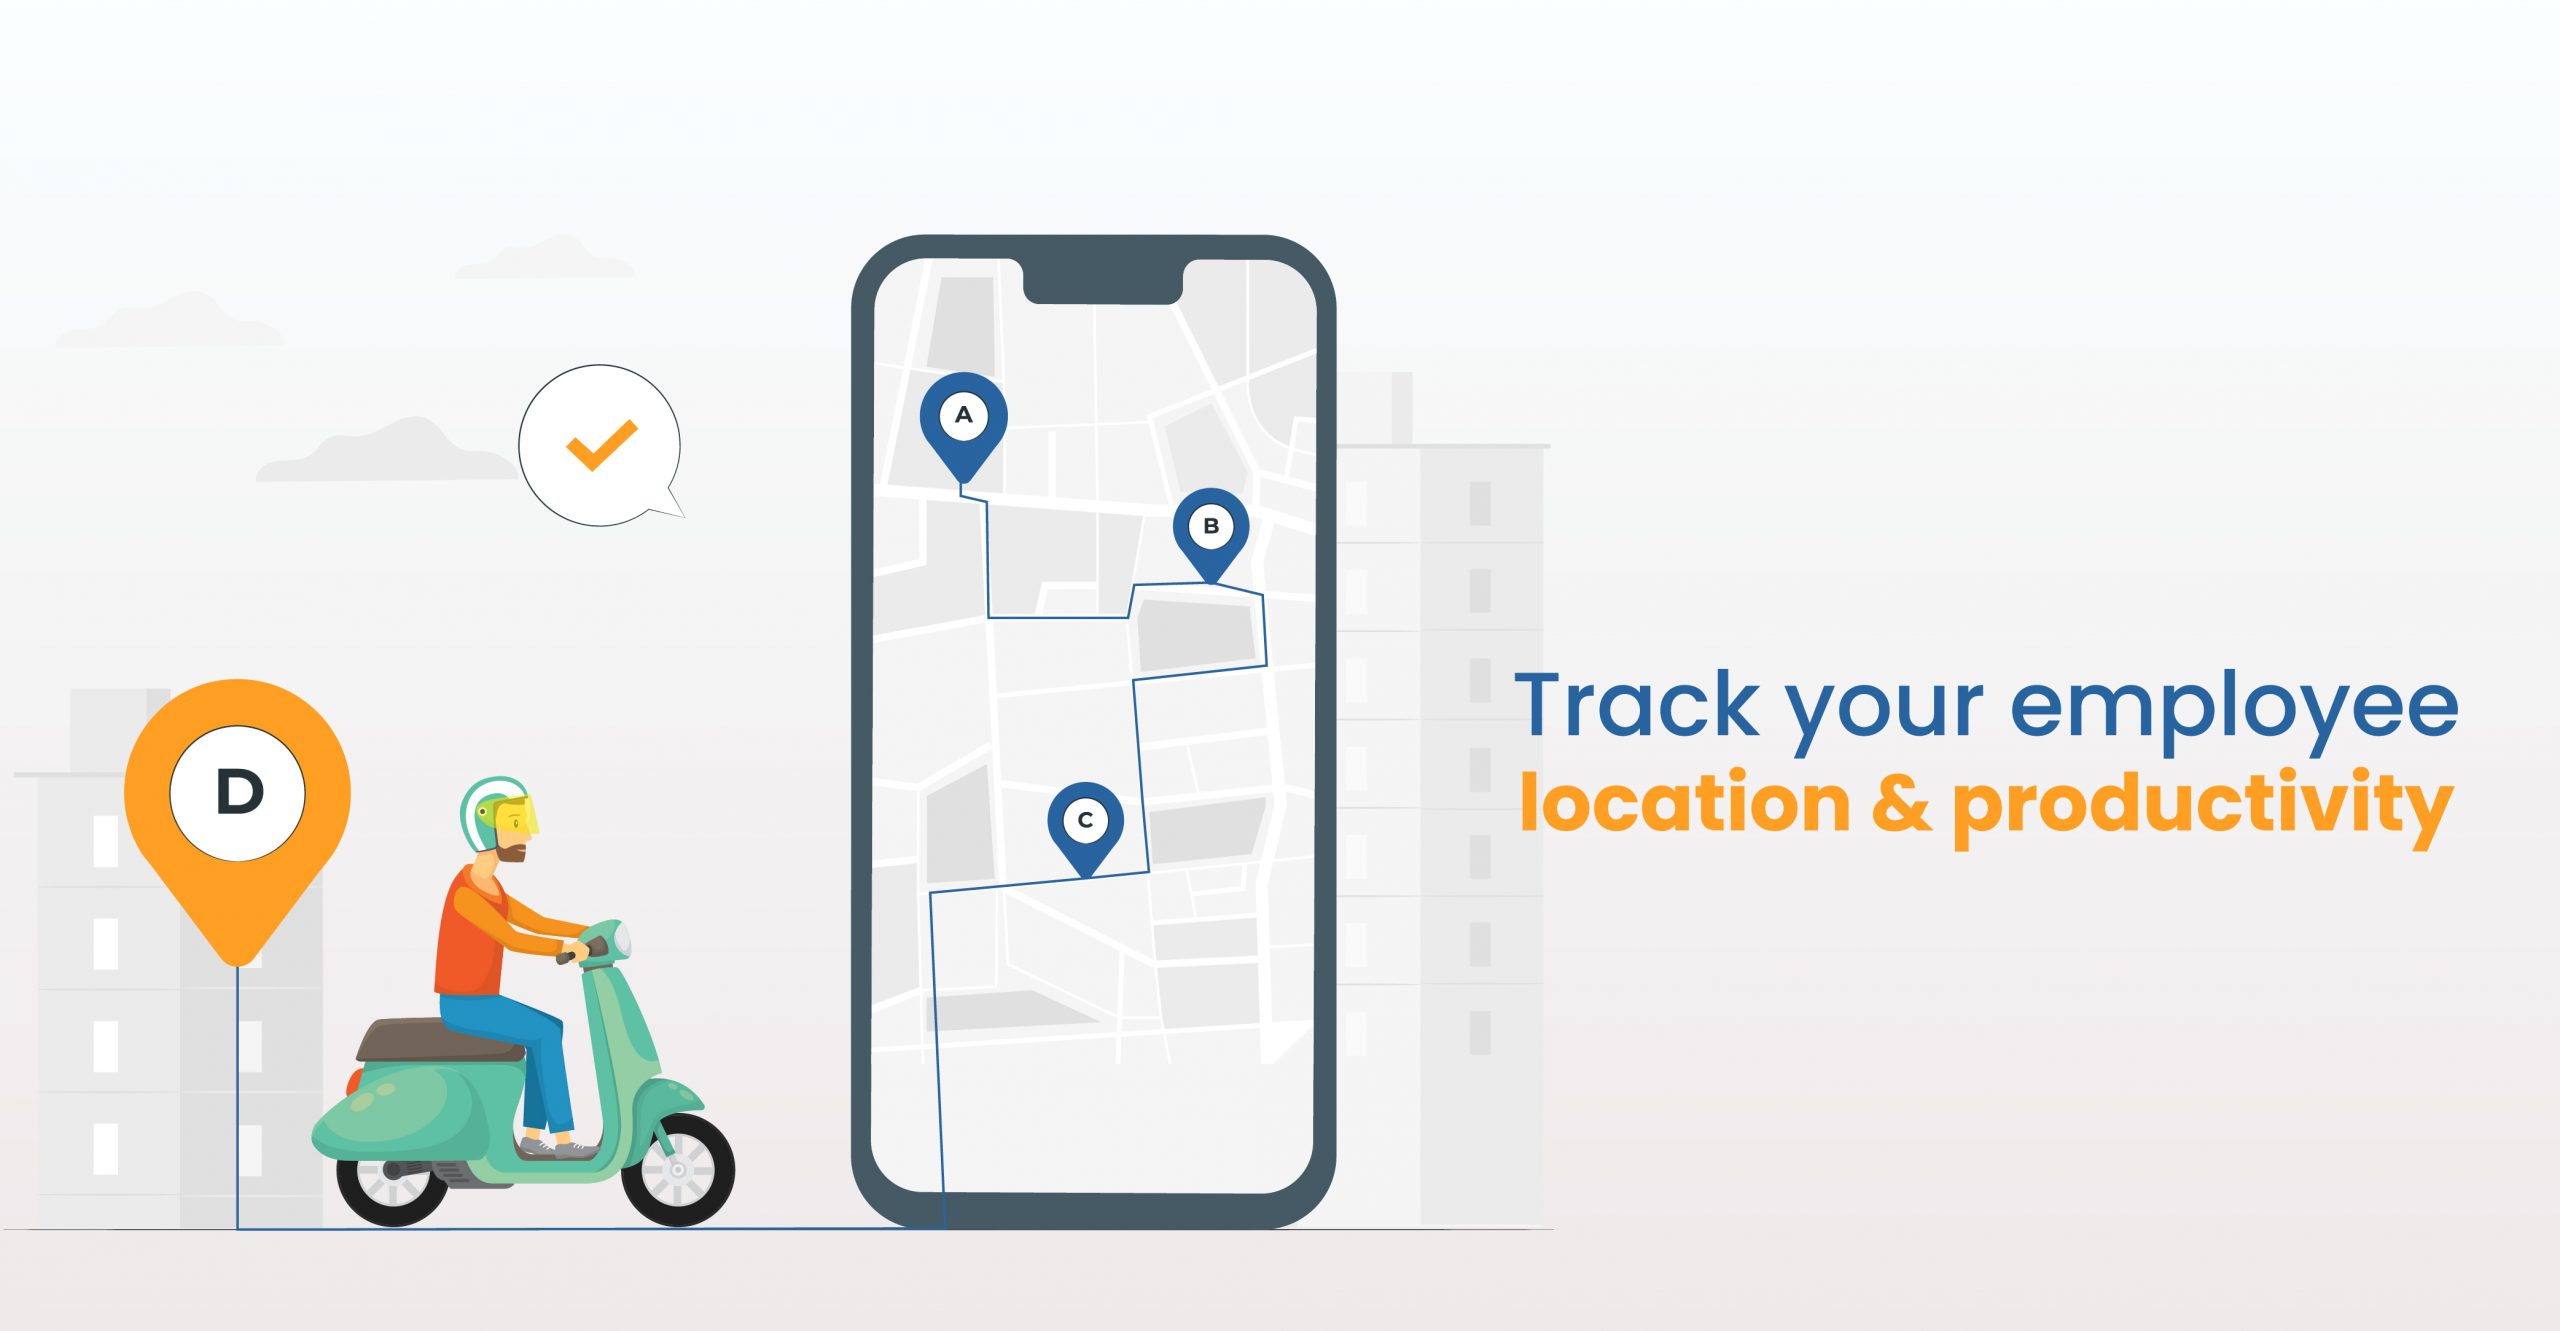 Track your employee location & productivity